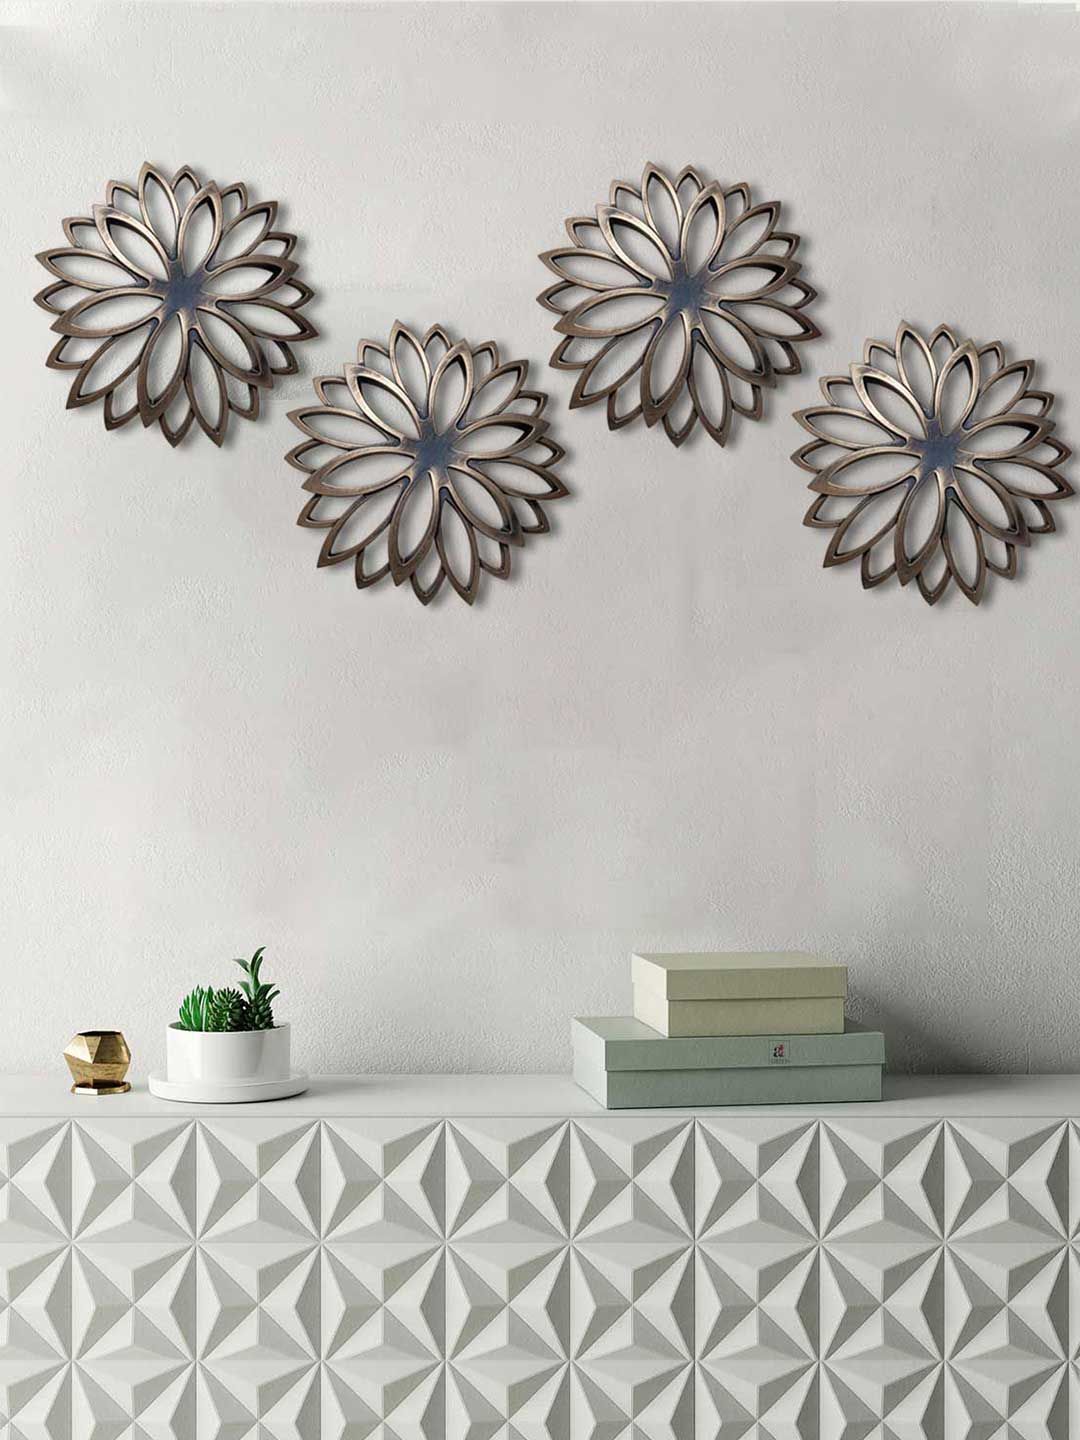 Art Street Set Of 4 Sunflower Decorative Plastic Plate Wall Dcor Price in India